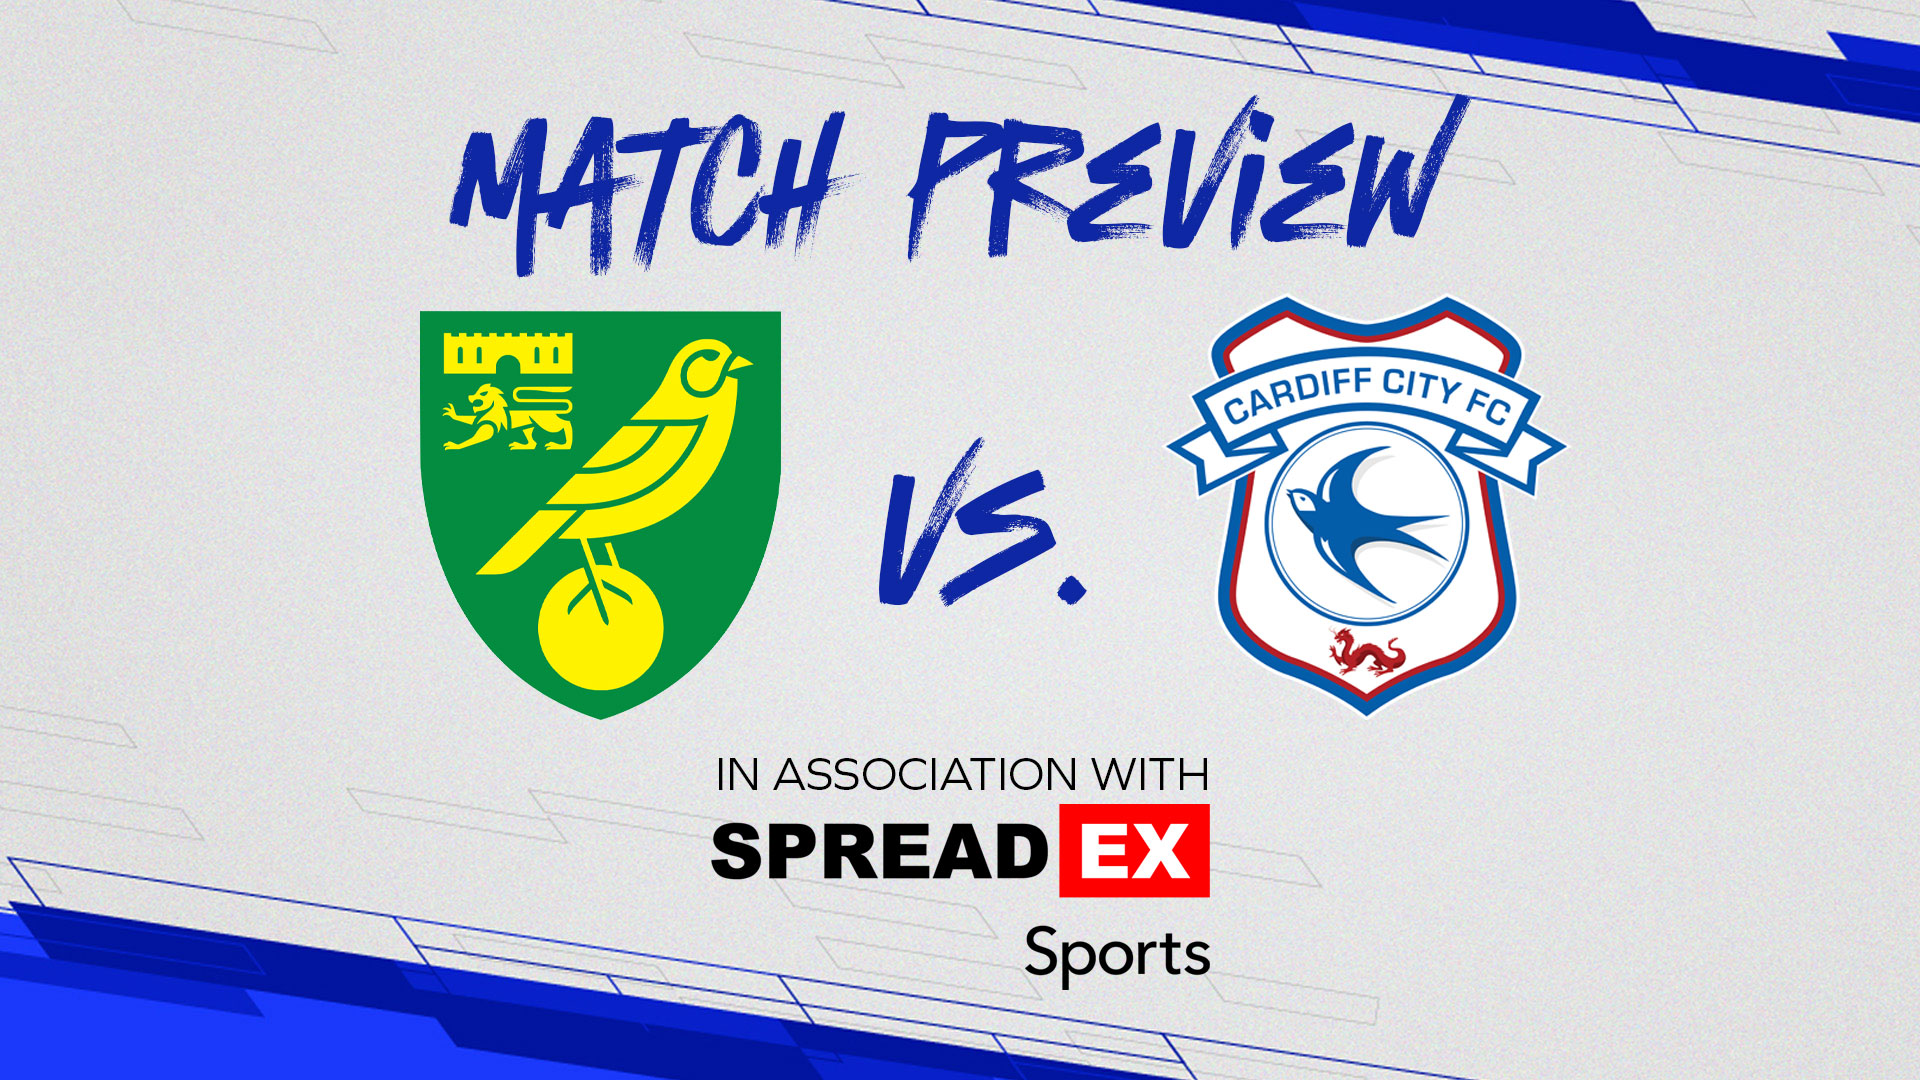 Match Preview, West Bromwich Albion vs. Cardiff City